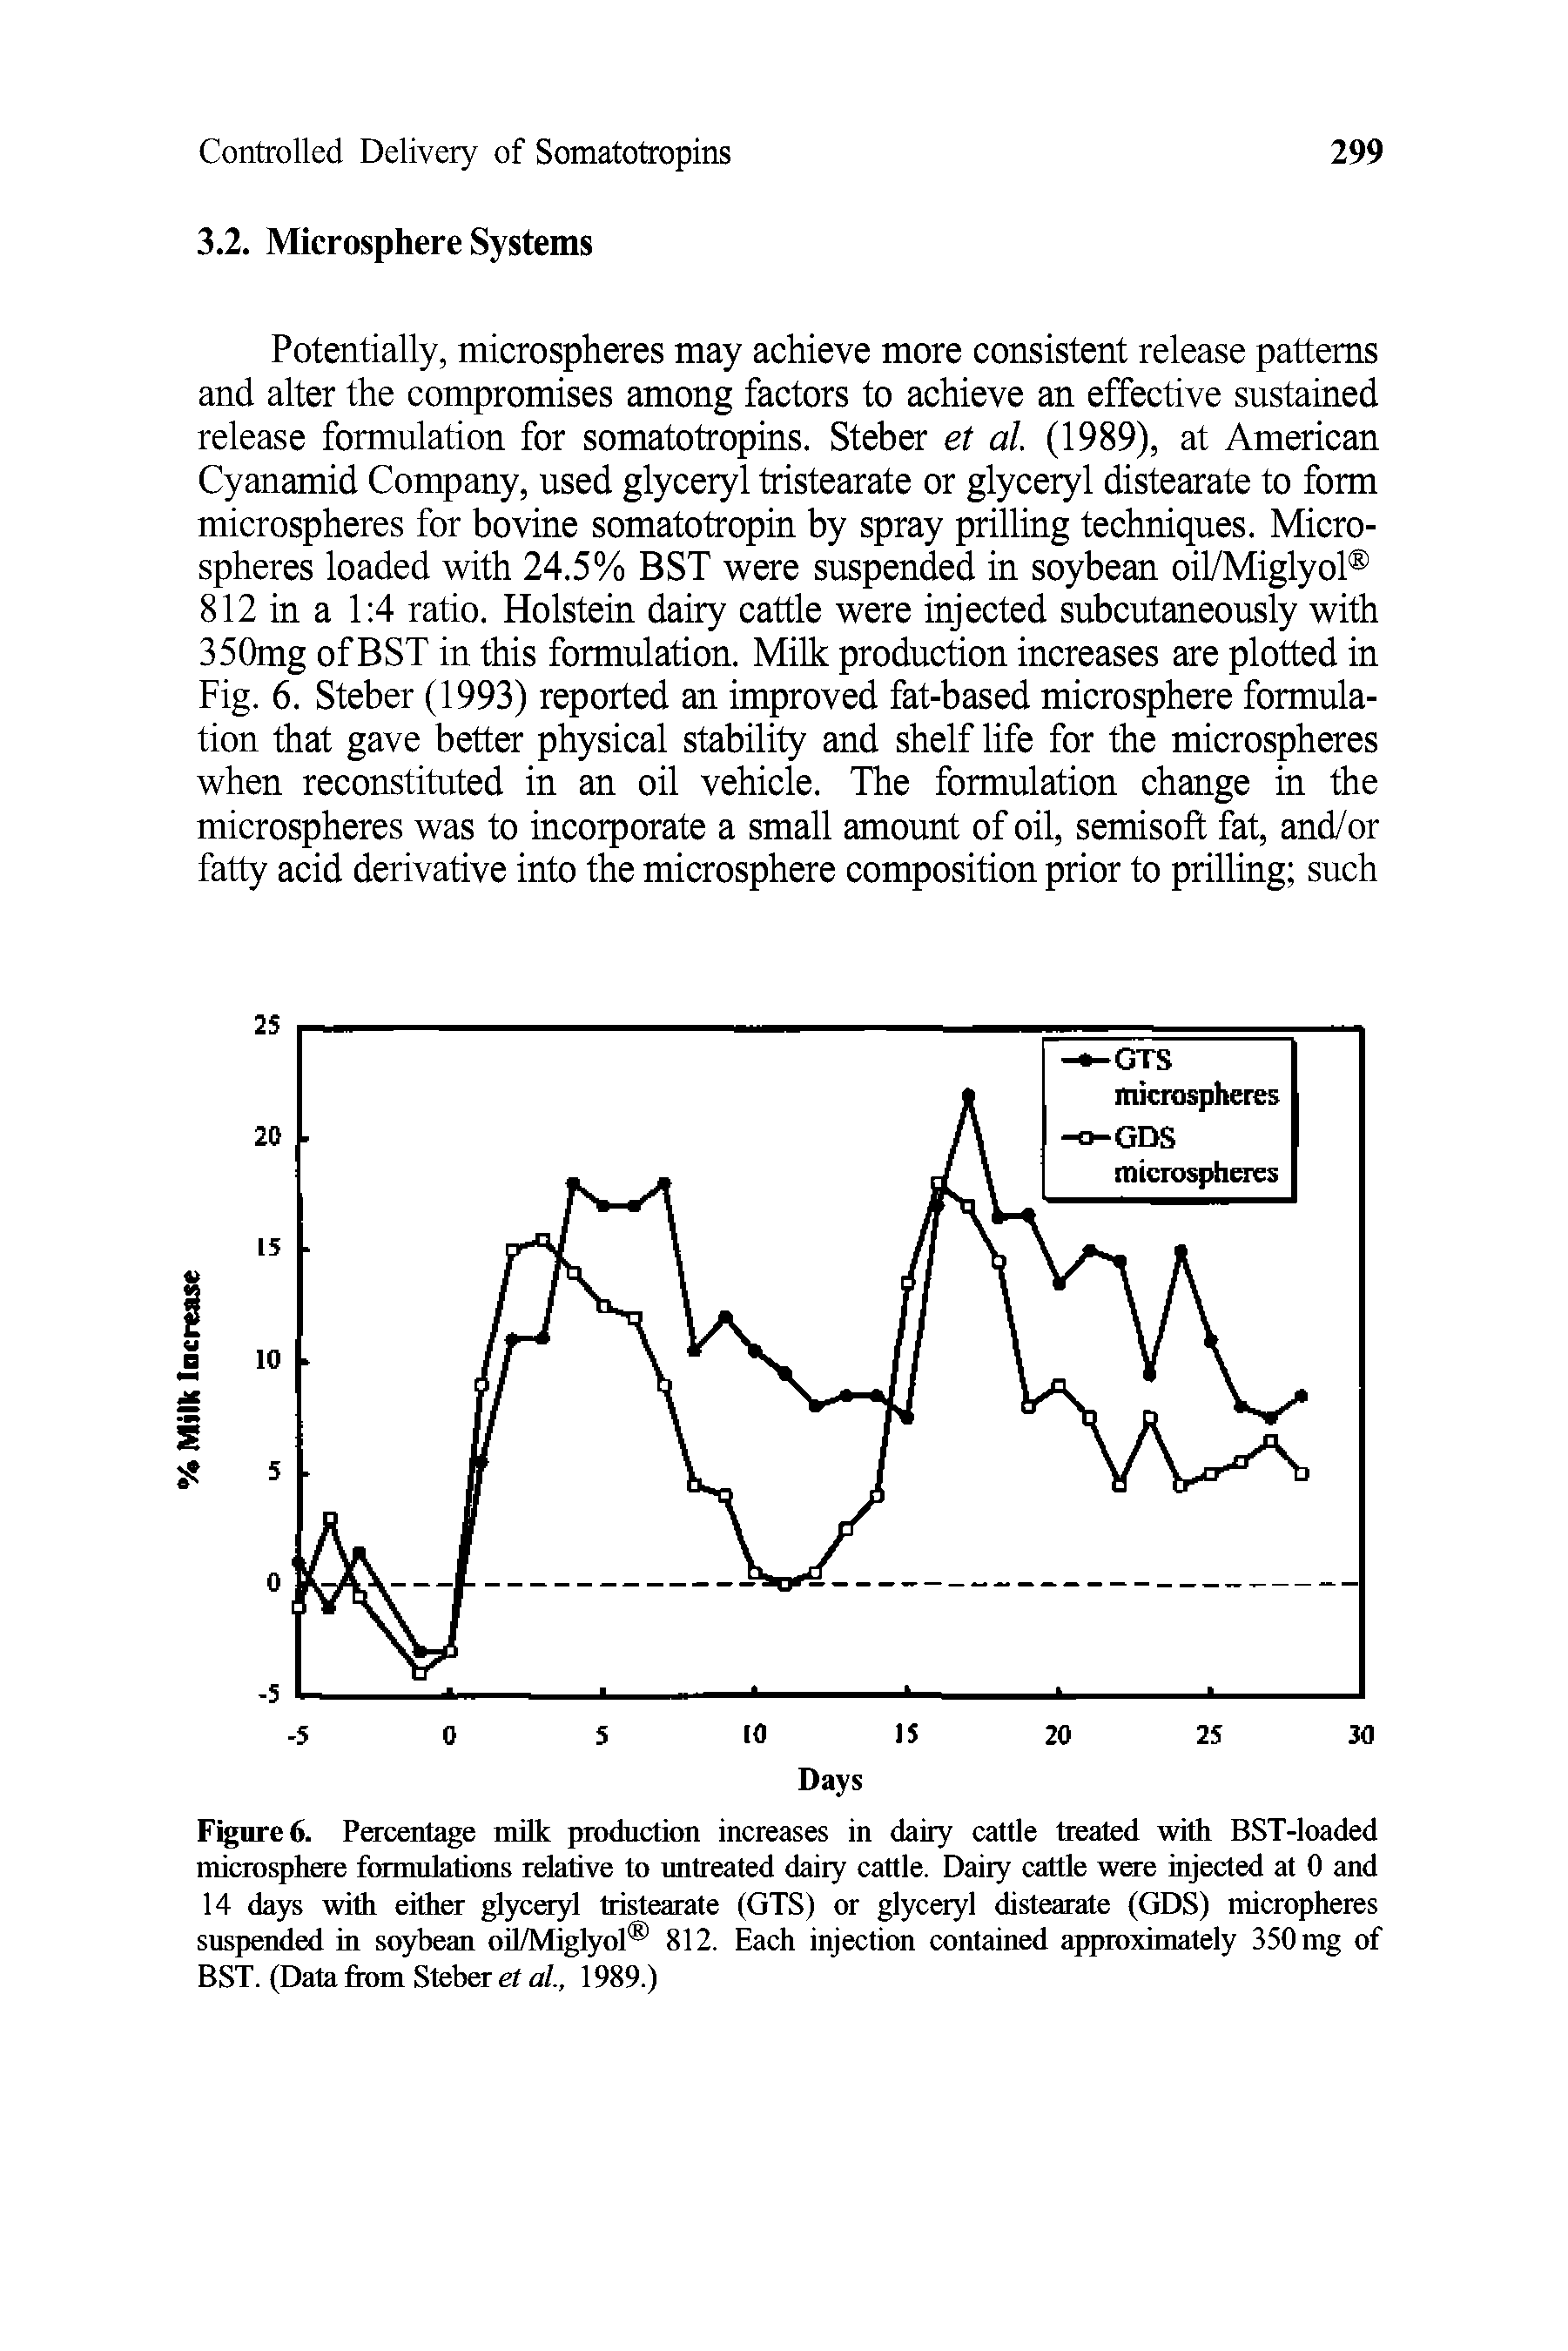 Figured. Percentage milk production increases in dairy cattle treated with BST-loaded microsphere fonnulatians relative to untreated dairy cattle. Dairy cattle were injected at 0 and 14 days with either glyceryl tristearate (GTS) or glyceryl distearate (GDS) microphetes suspended in soybean oil/Miglyol 812. Each injection contained approximately 350 mg of BST. (Data fiom Steber et al., 1989.)...